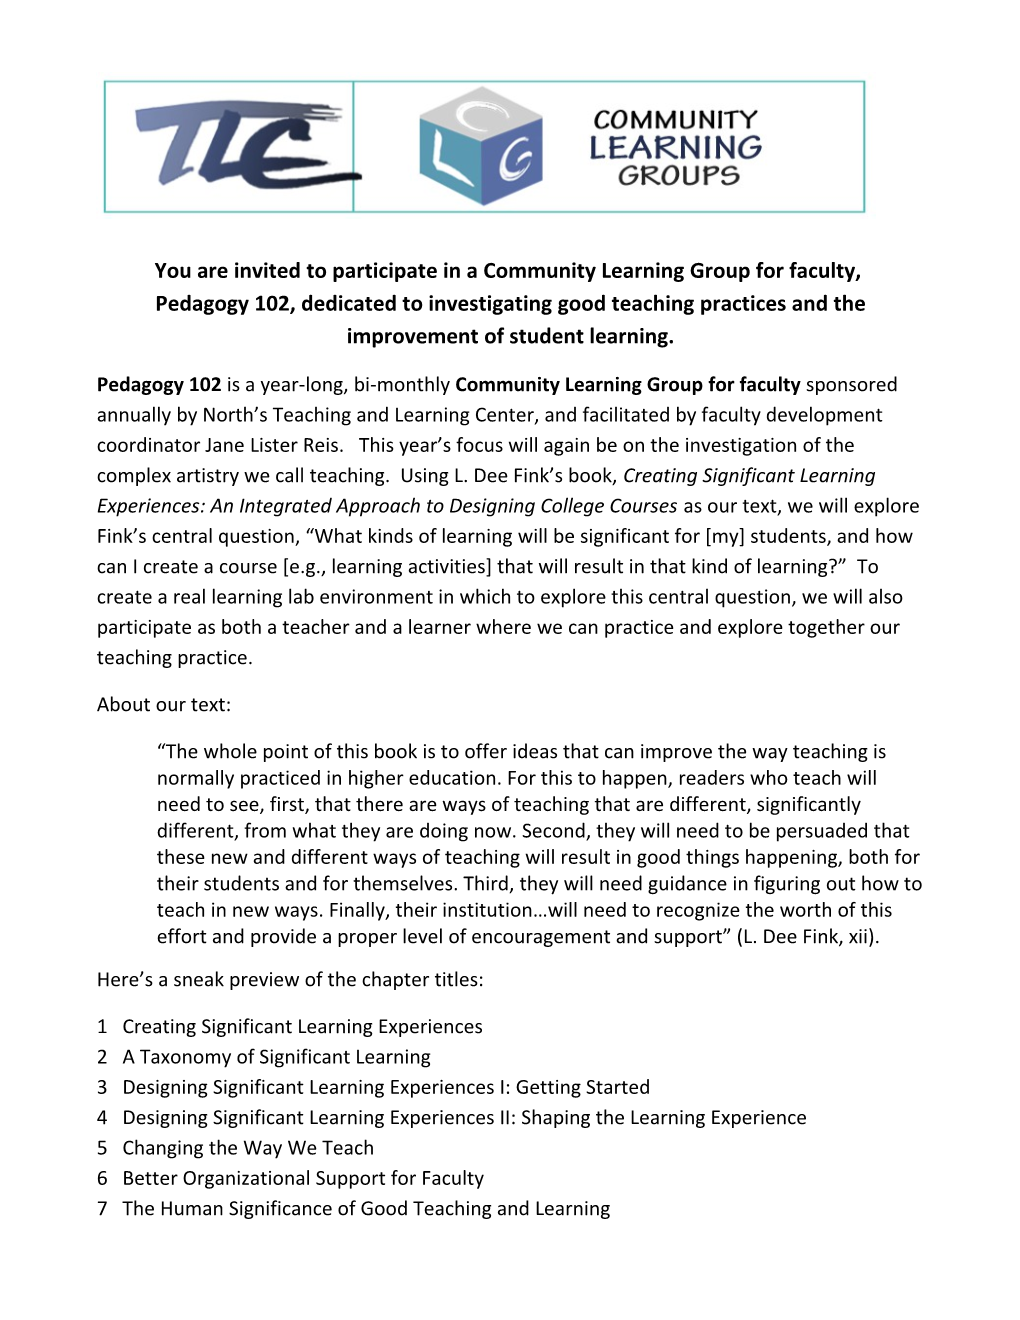 You Are Invited to Participate in a Communitylearning Group for Faculty, Pedagogy 102